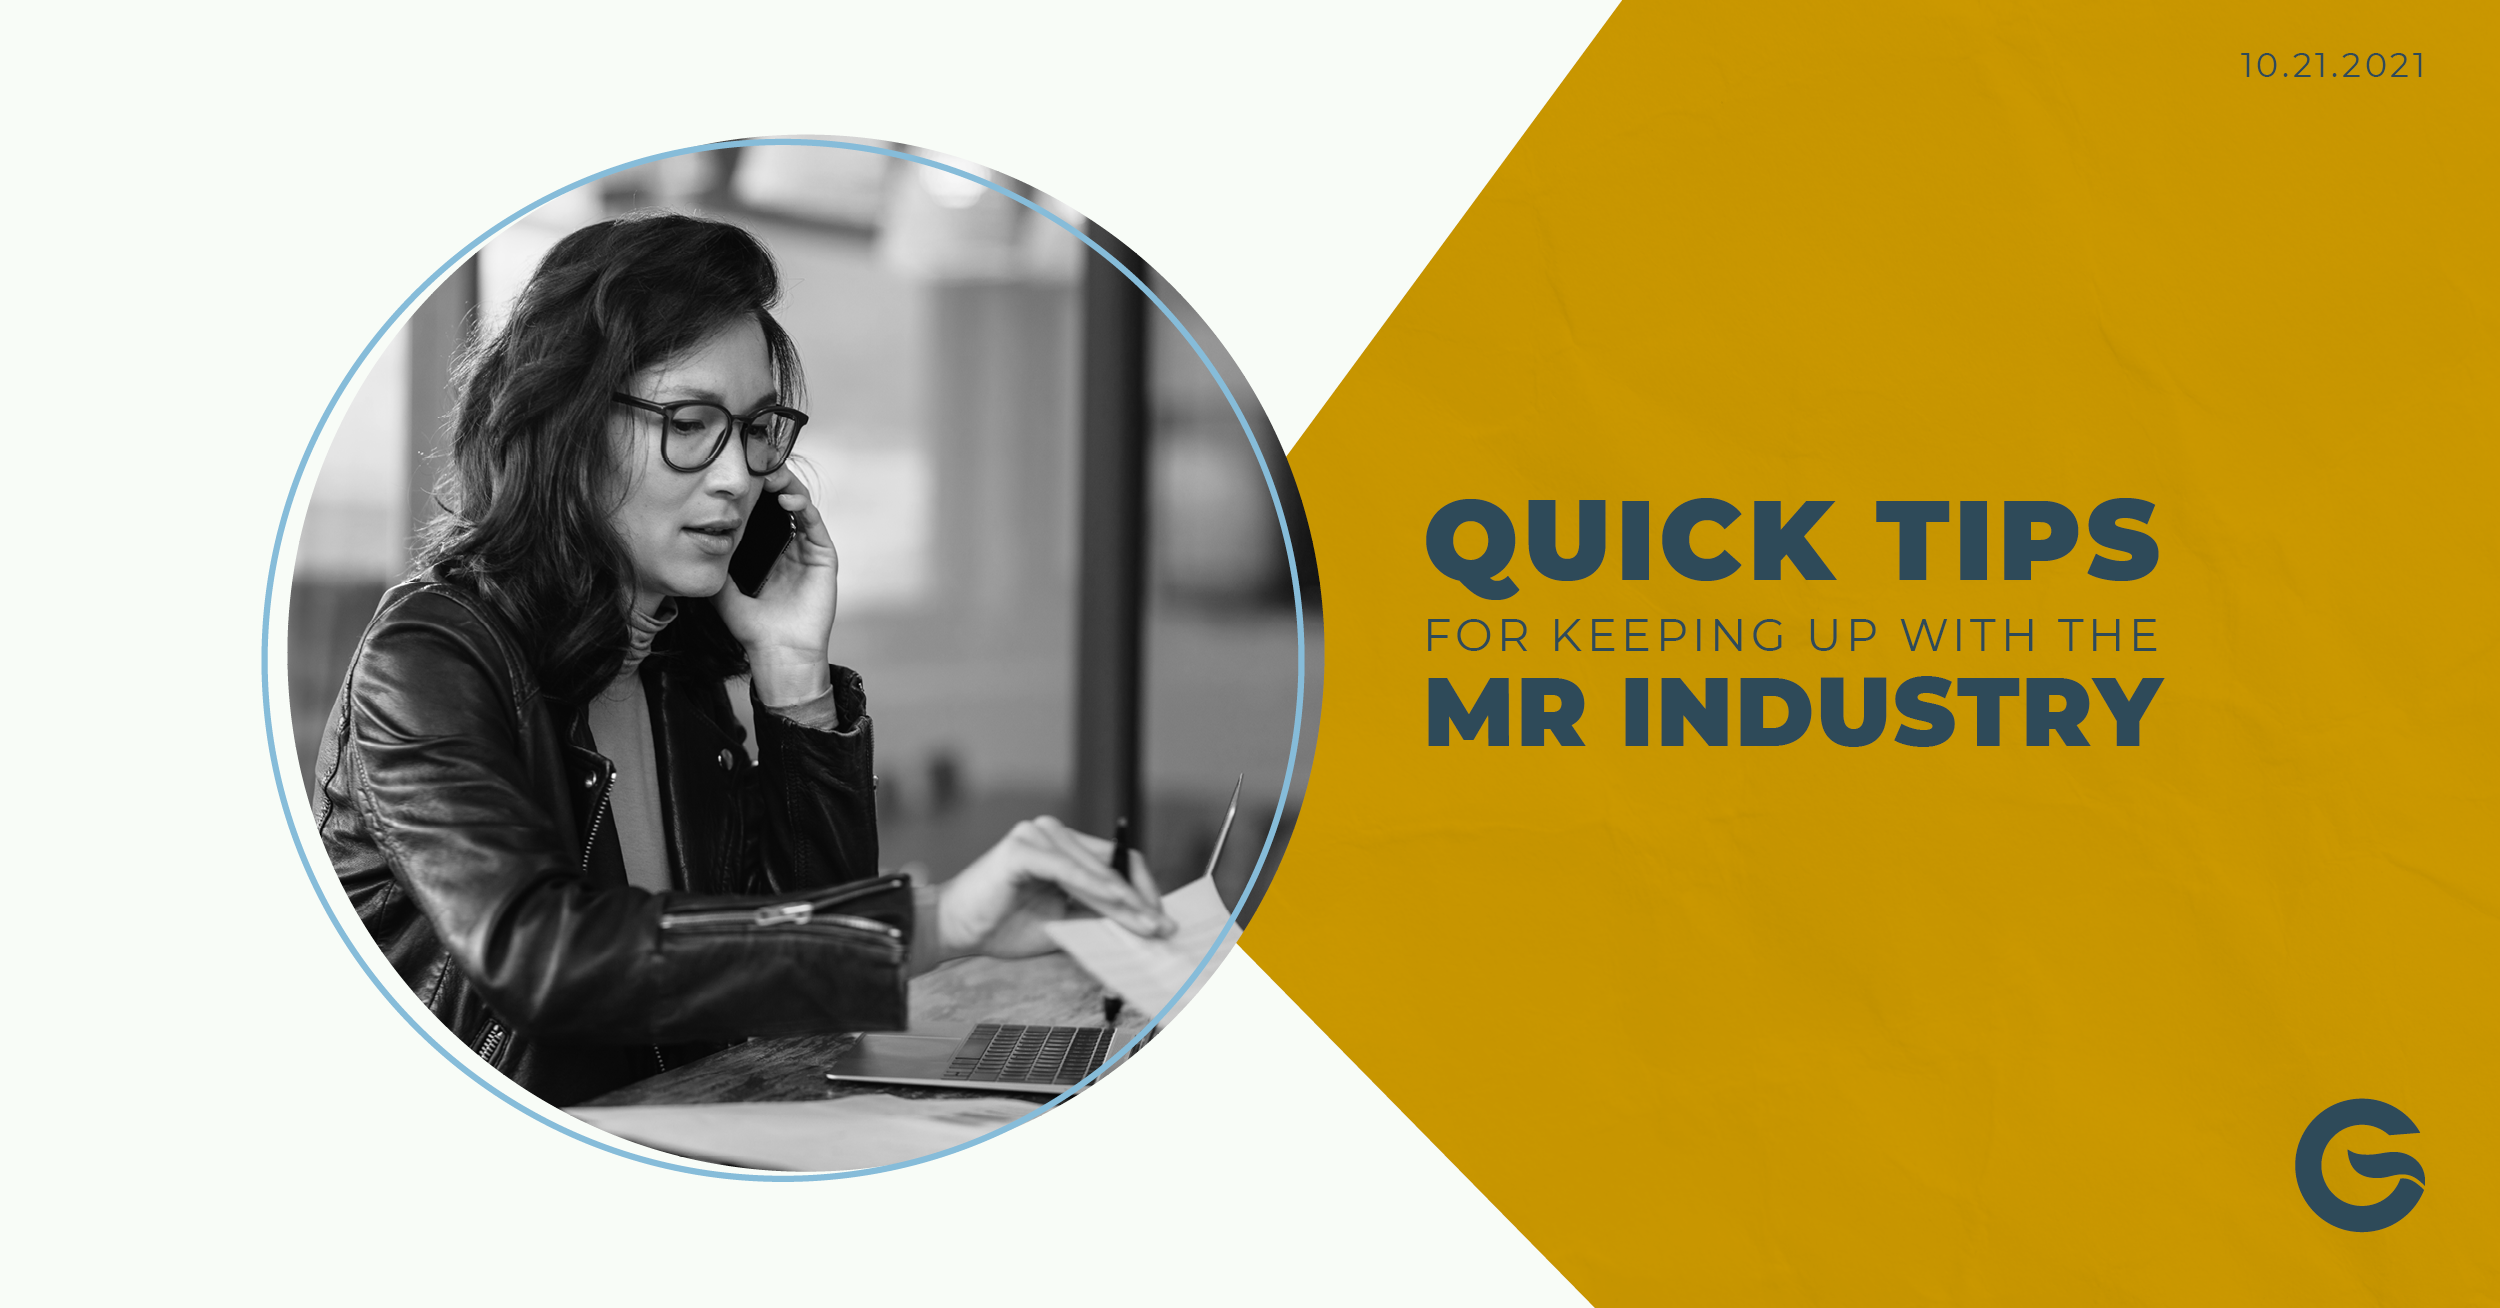 Quick Tips for Keeping Up With the MR Industry Image